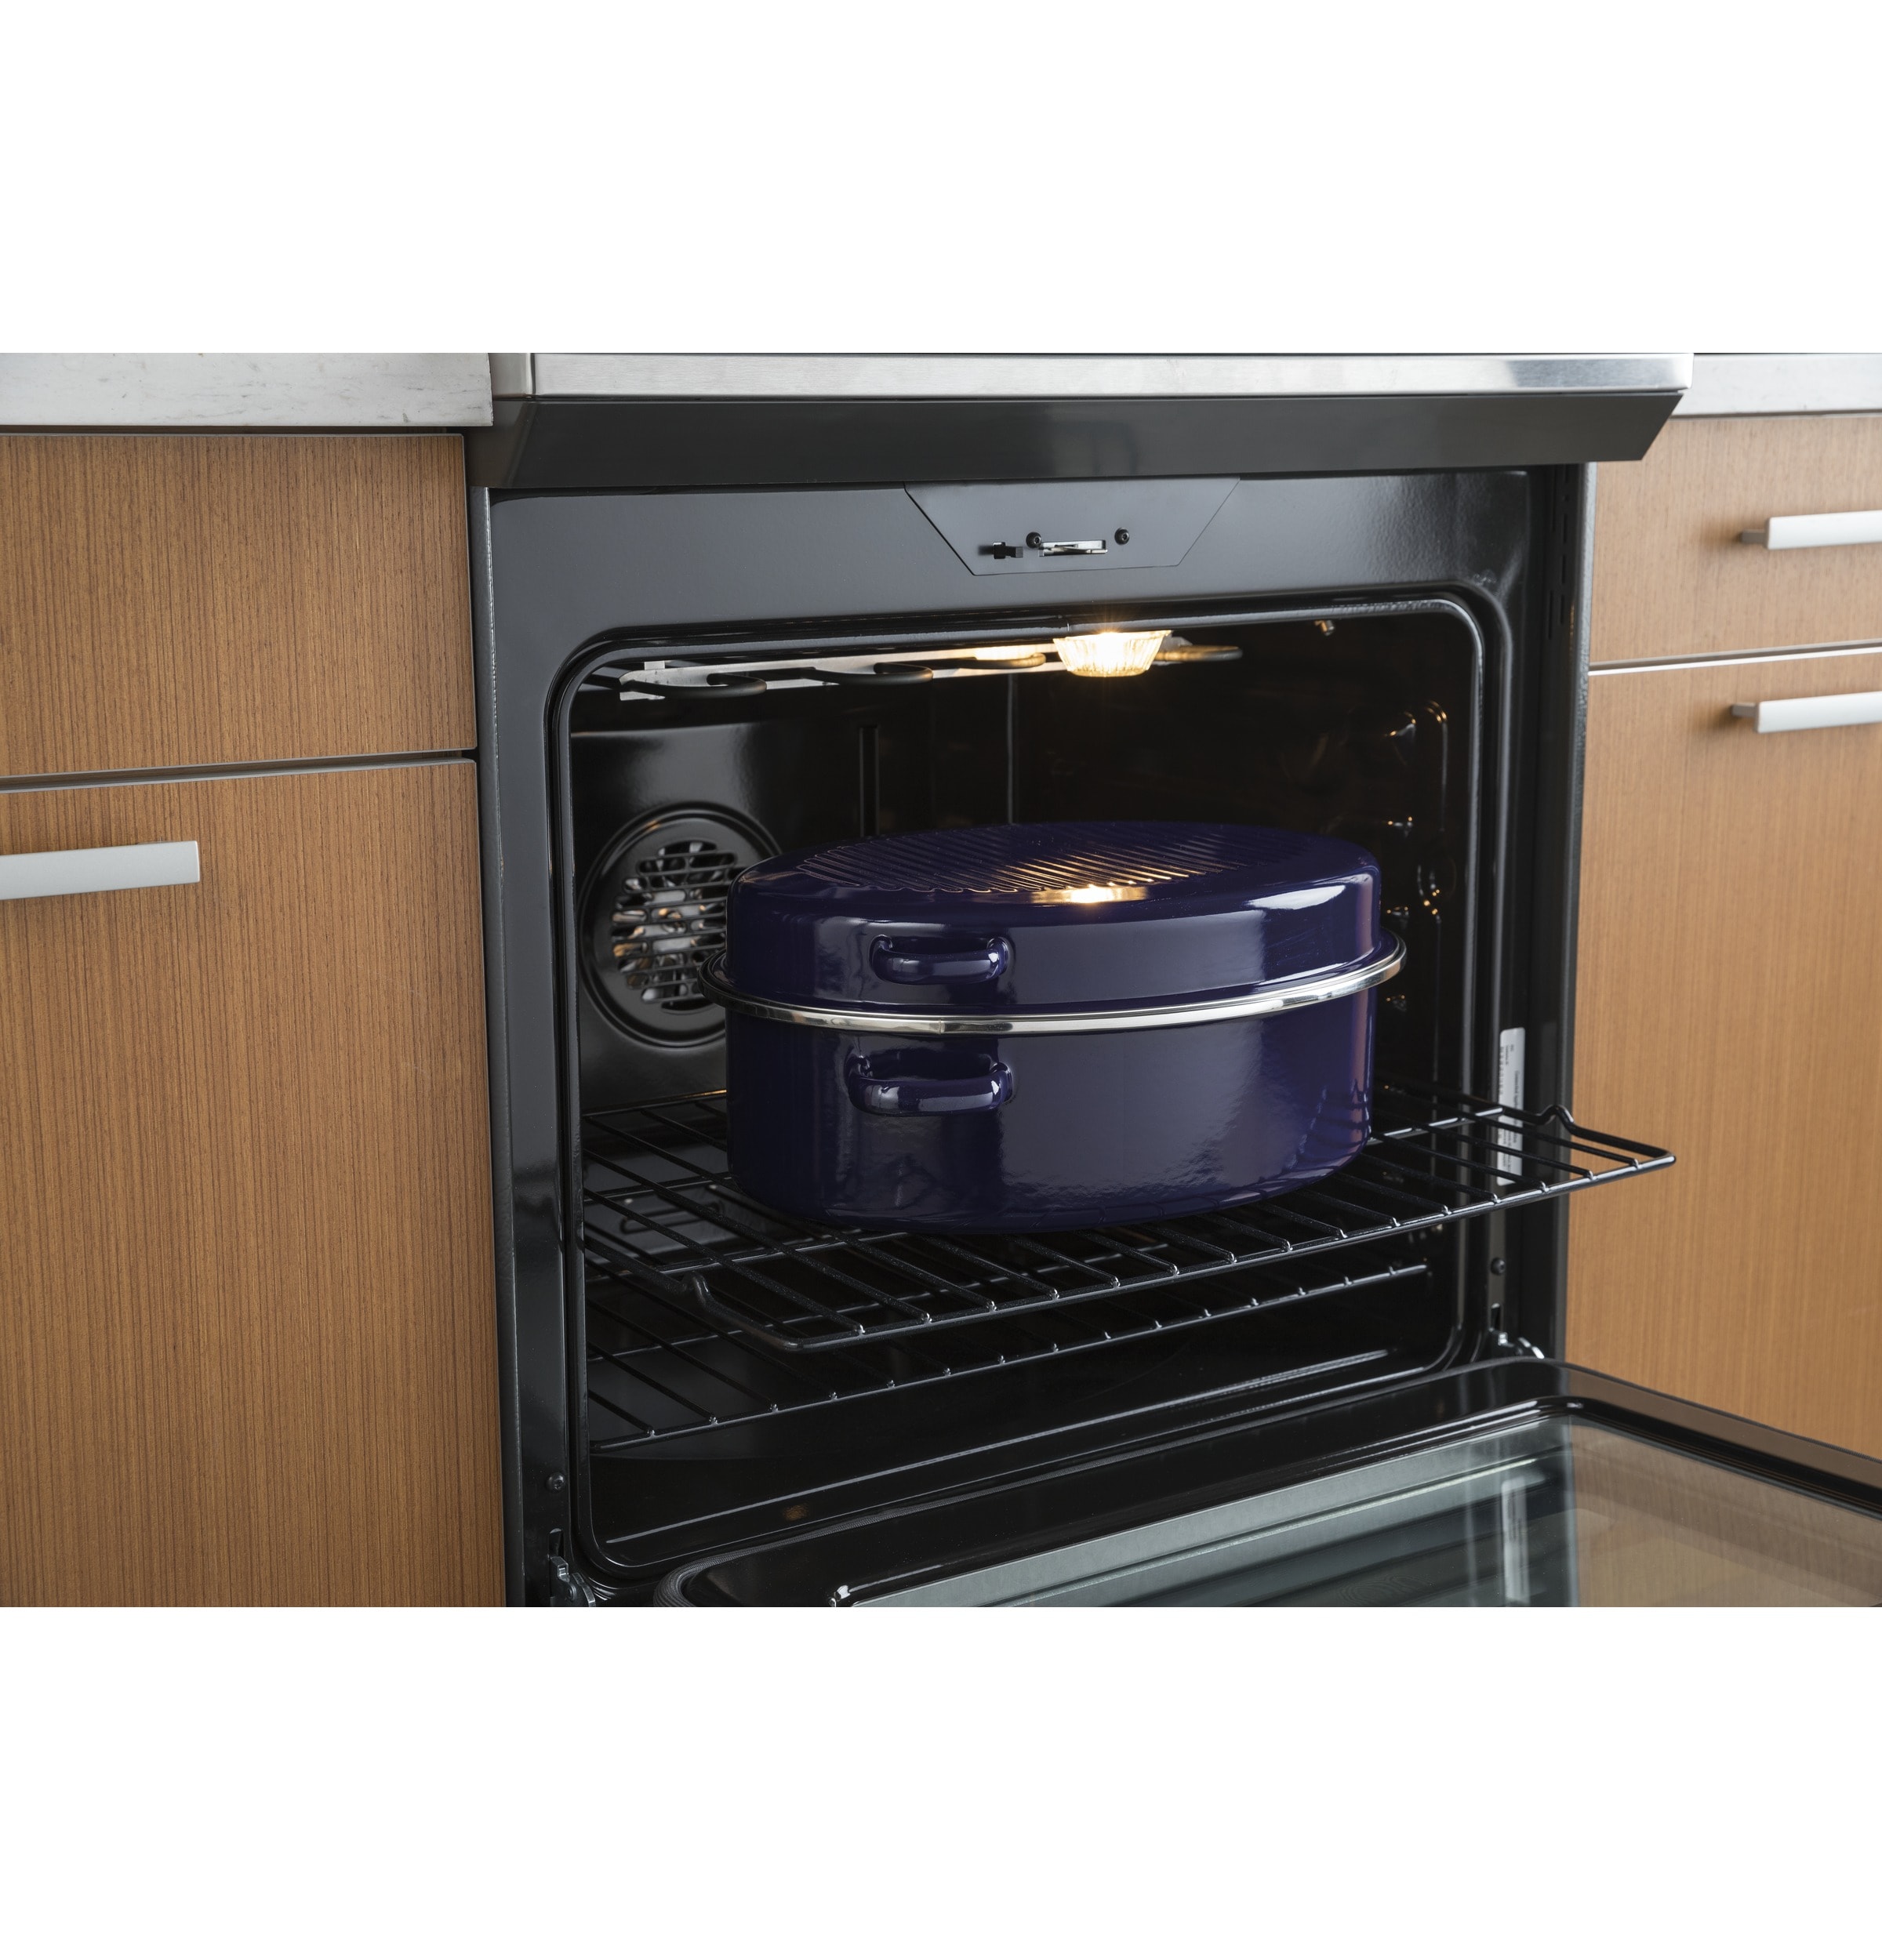 1 Plug Type 2000w Multifunctional Electric Stove Sk-5112, Double Oven  Design, High Power, High Power, One Machine, Multi-purpose, Multiple Gears,  Simple Operation, One Machine, Multi-purpose, Double Oven Design, Energy  Saving, No Choice